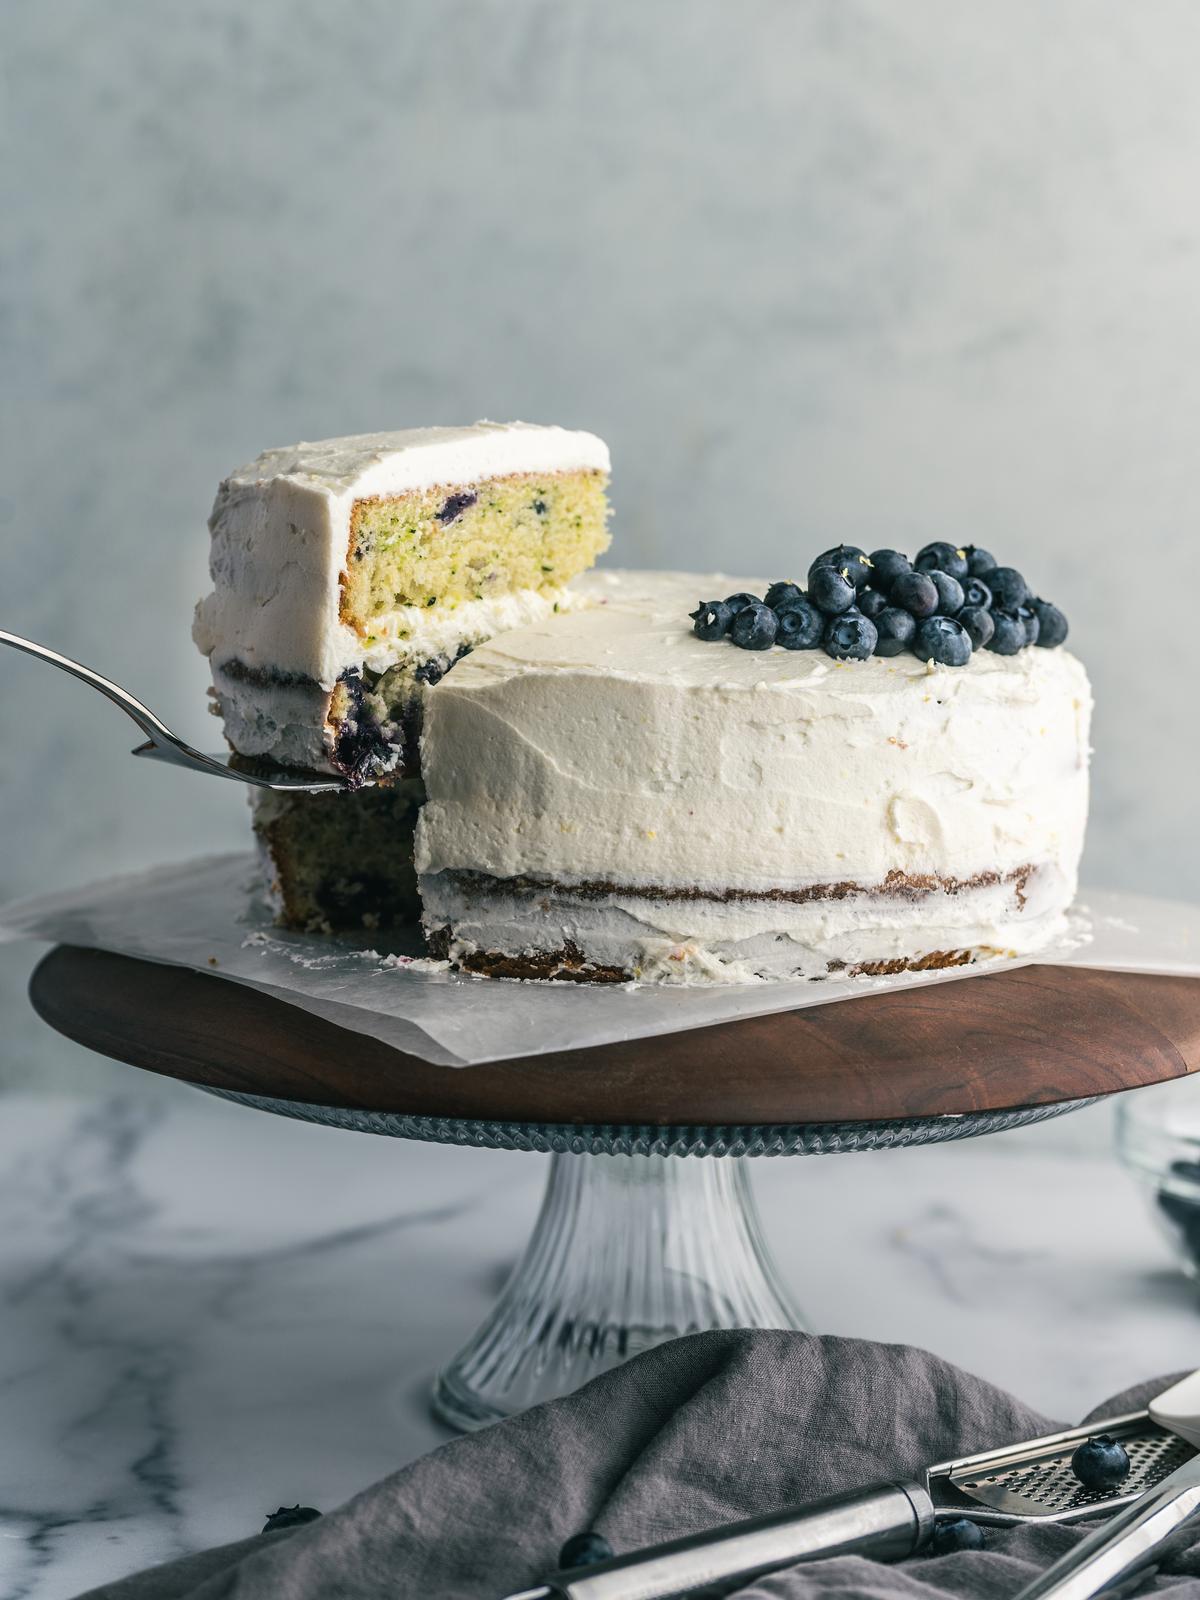 Made tender with zucchini and applesauce, studded with blackberries and blueberries, and finished with lemon buttercream, this is essentially a fruit and vegetable medley in delicious cake form. (Matt Genders Photography)